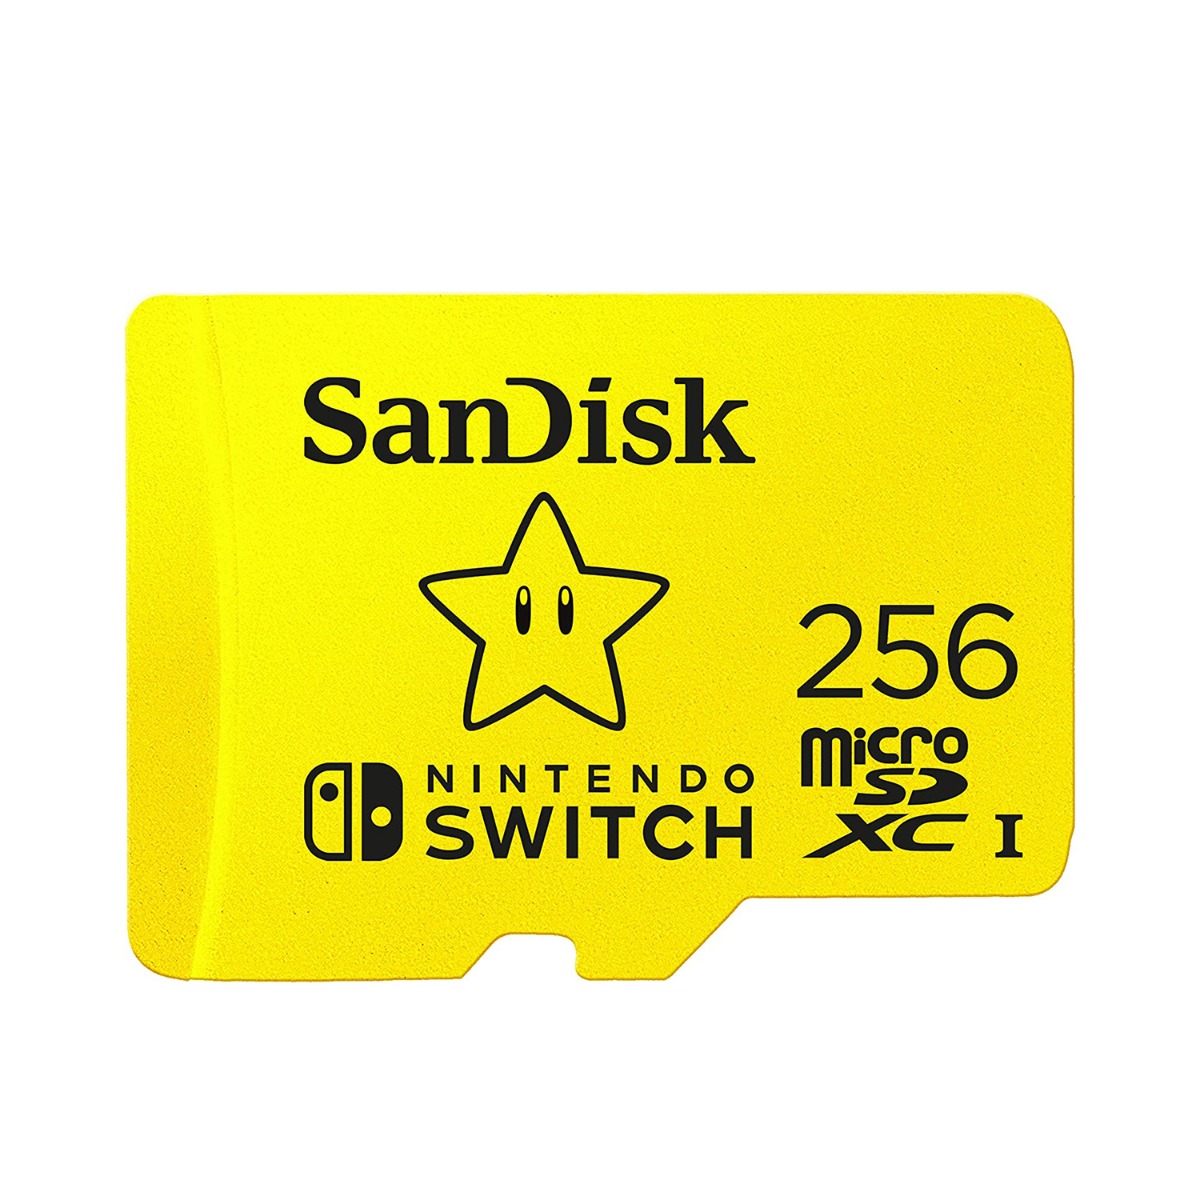 SanDisk 256GB microSDXC card for Nintendo Switch consoles up to 100 MB/s UHS-I Class 10 U3